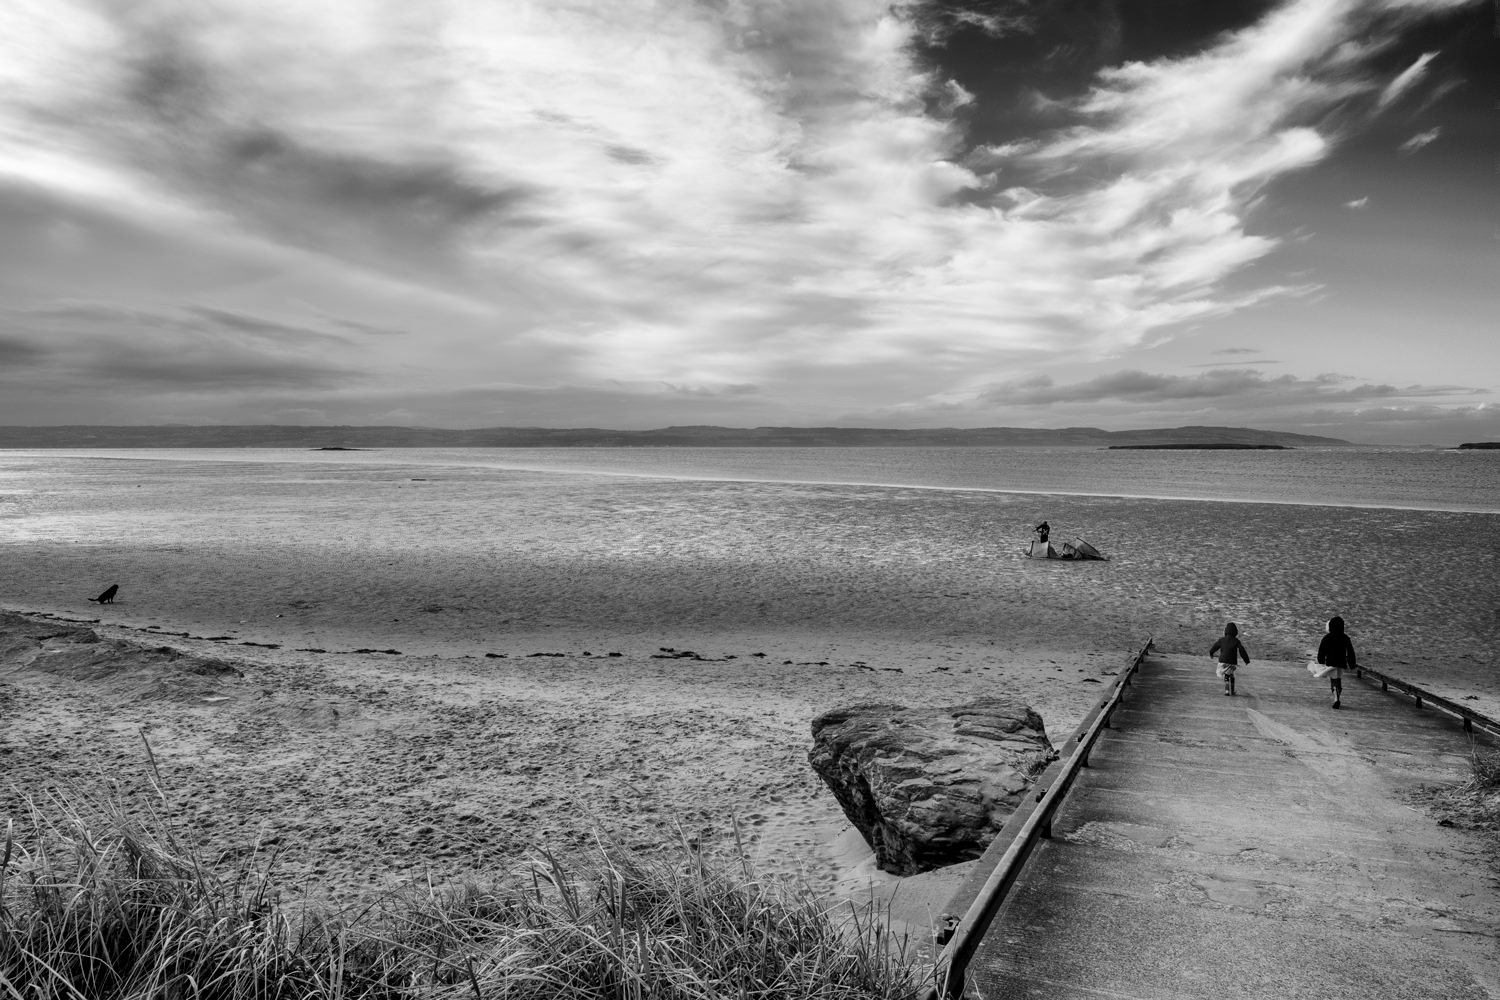 Looking across a sandy beach towards the sea. The North Wales coast is visible across the sea and the sky has dramatic clouds. There are two girls walking on to the beach